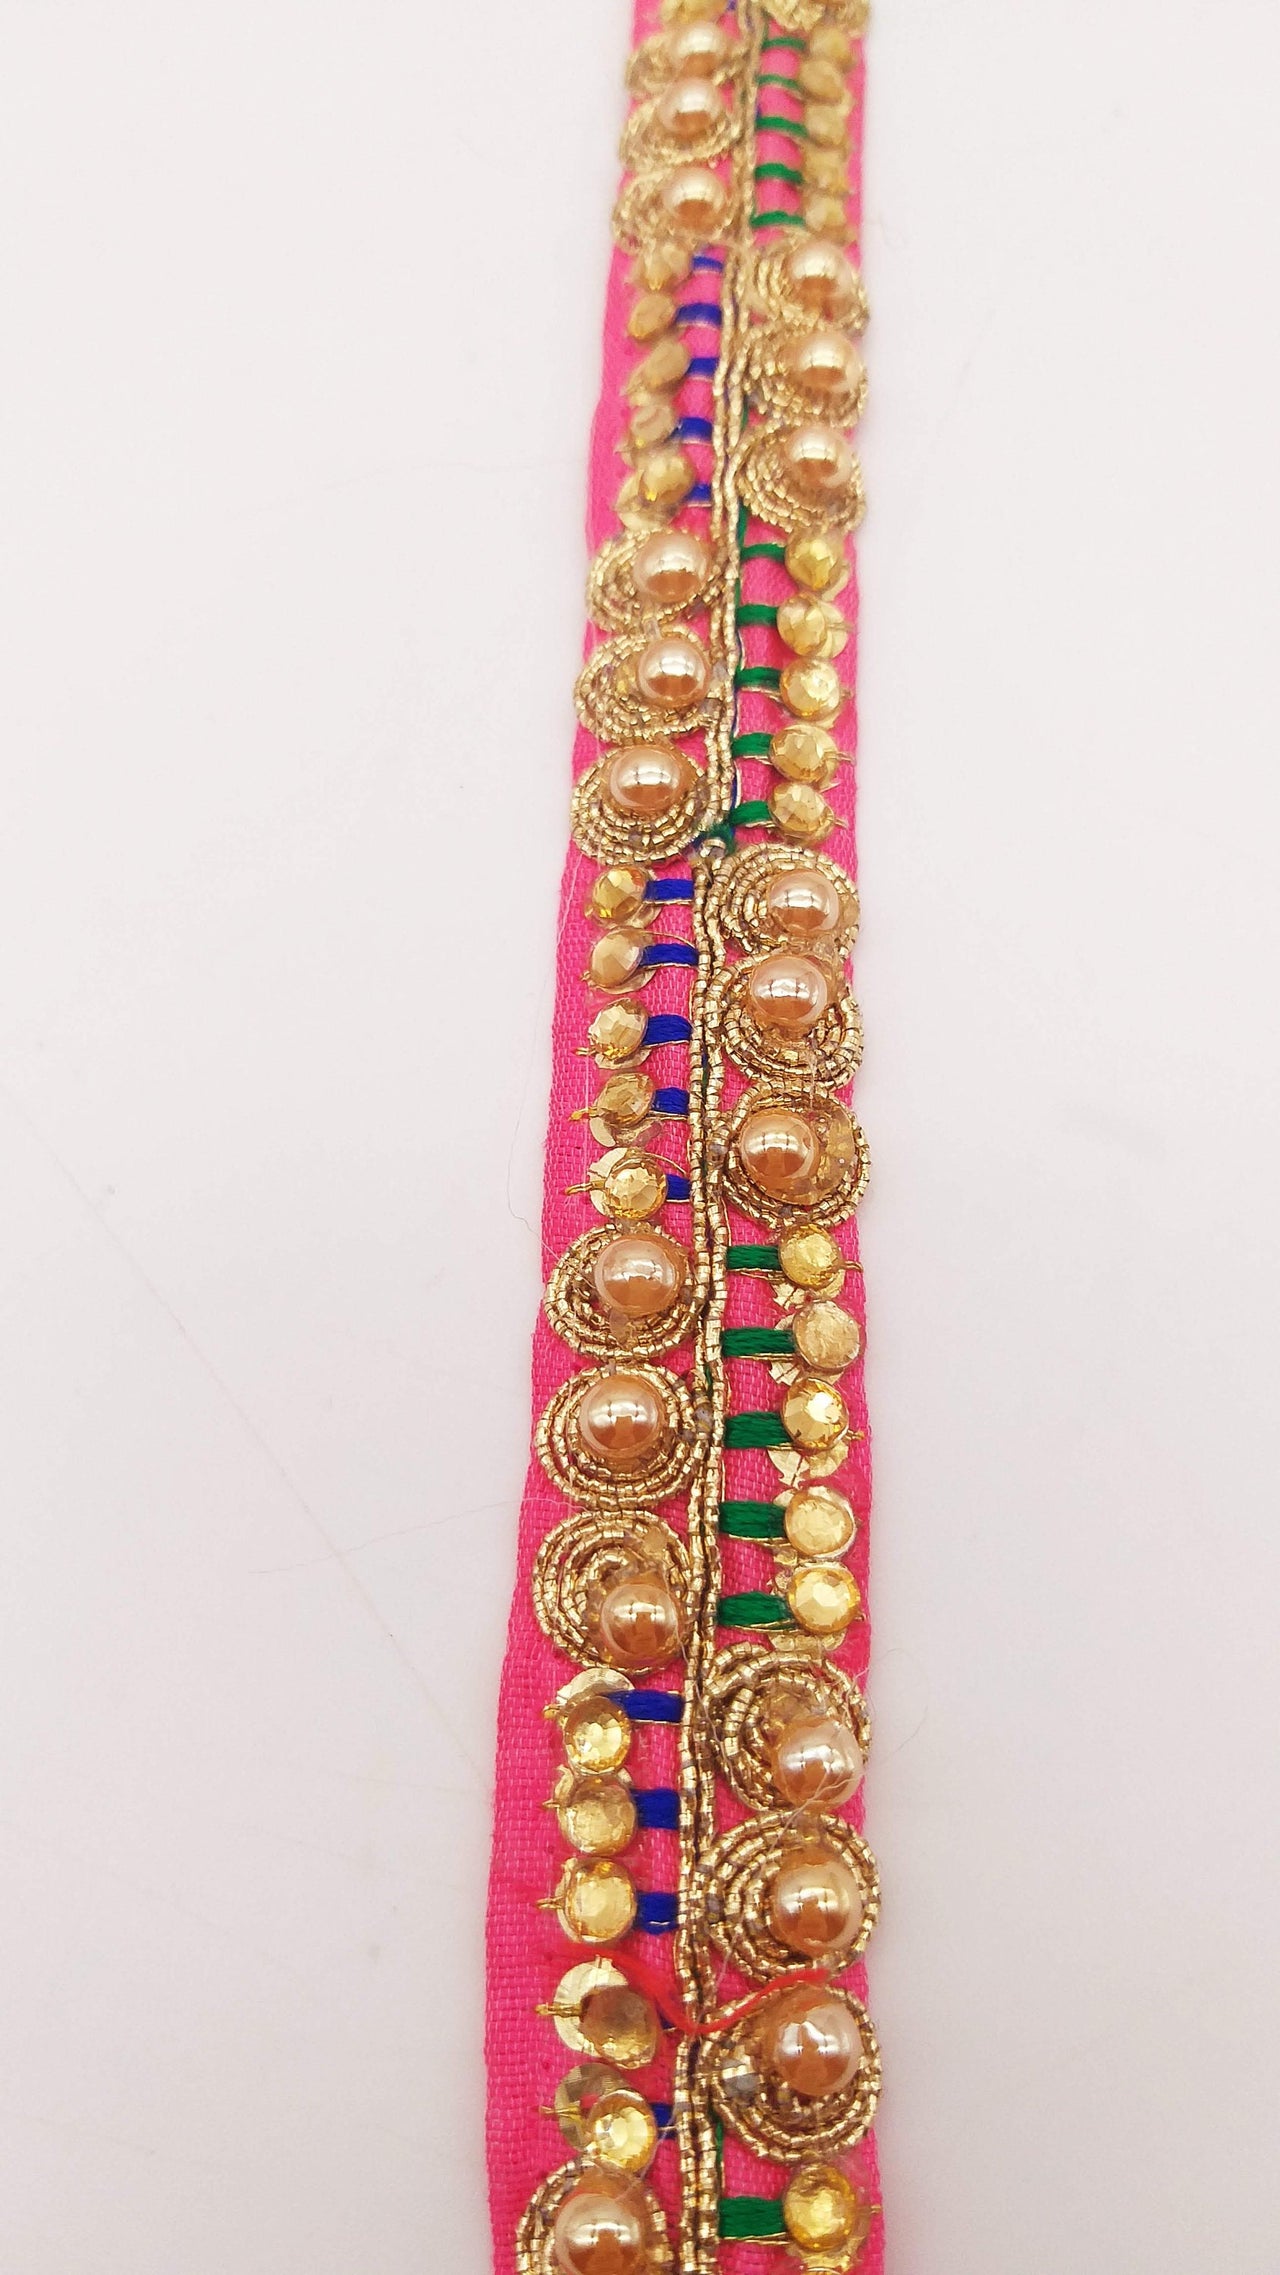 Cerise Pink Fabric Embroidered Trim with Gold Beads, Decorative Sari Trim, Trim By 3 Yards